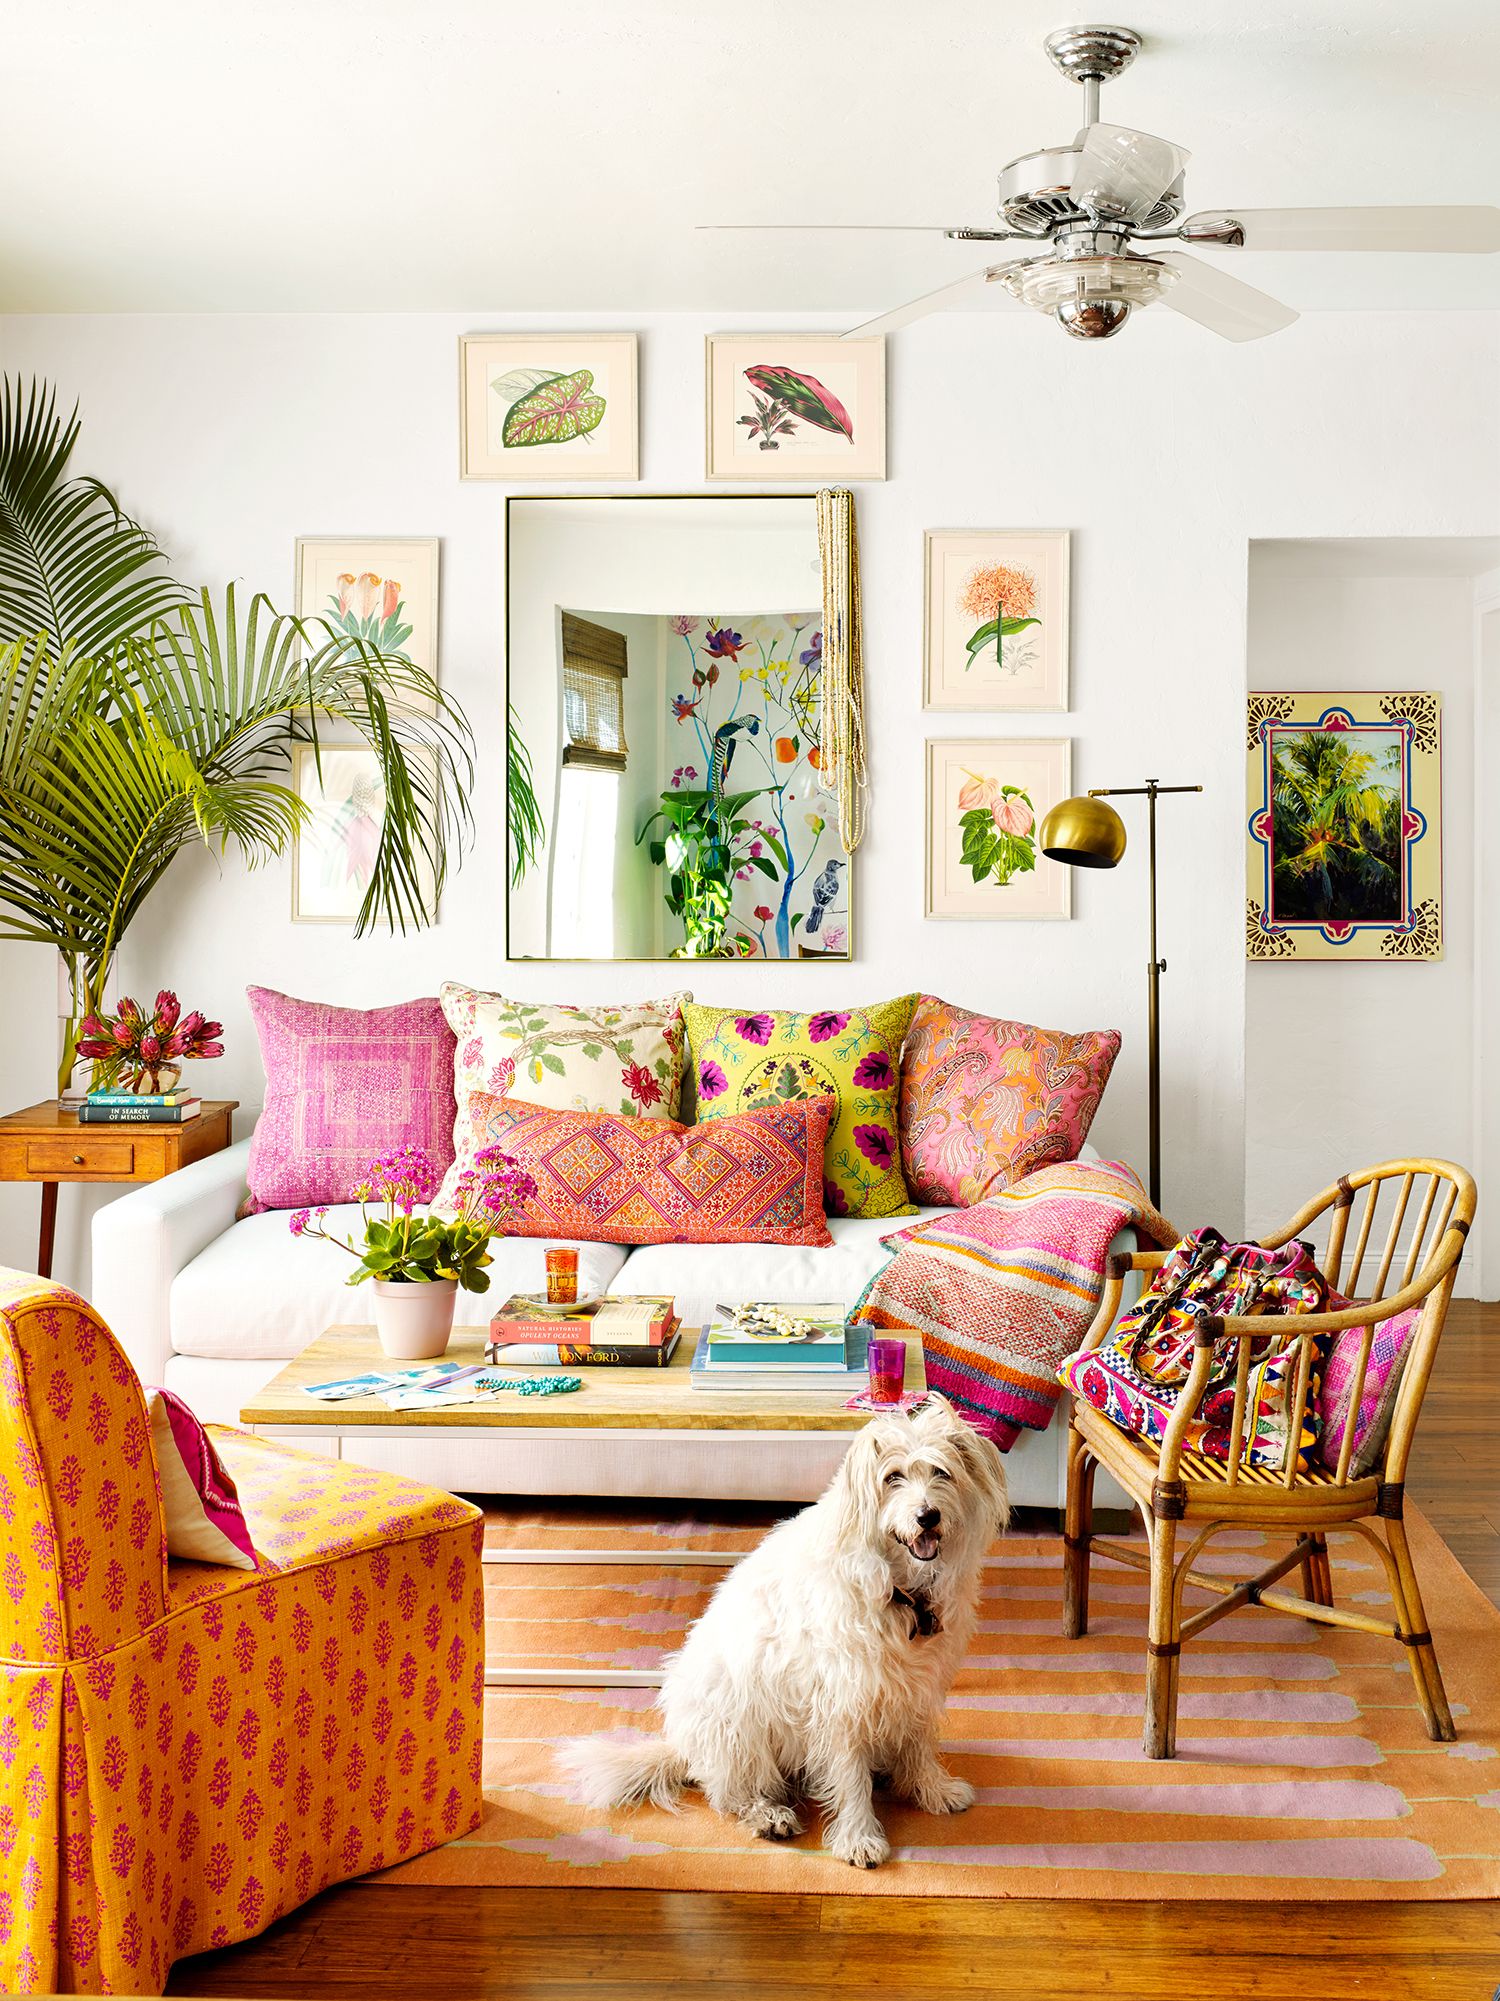 How To Hit The Boho Style In A Interior Design Project  Inspirations   Essential Home